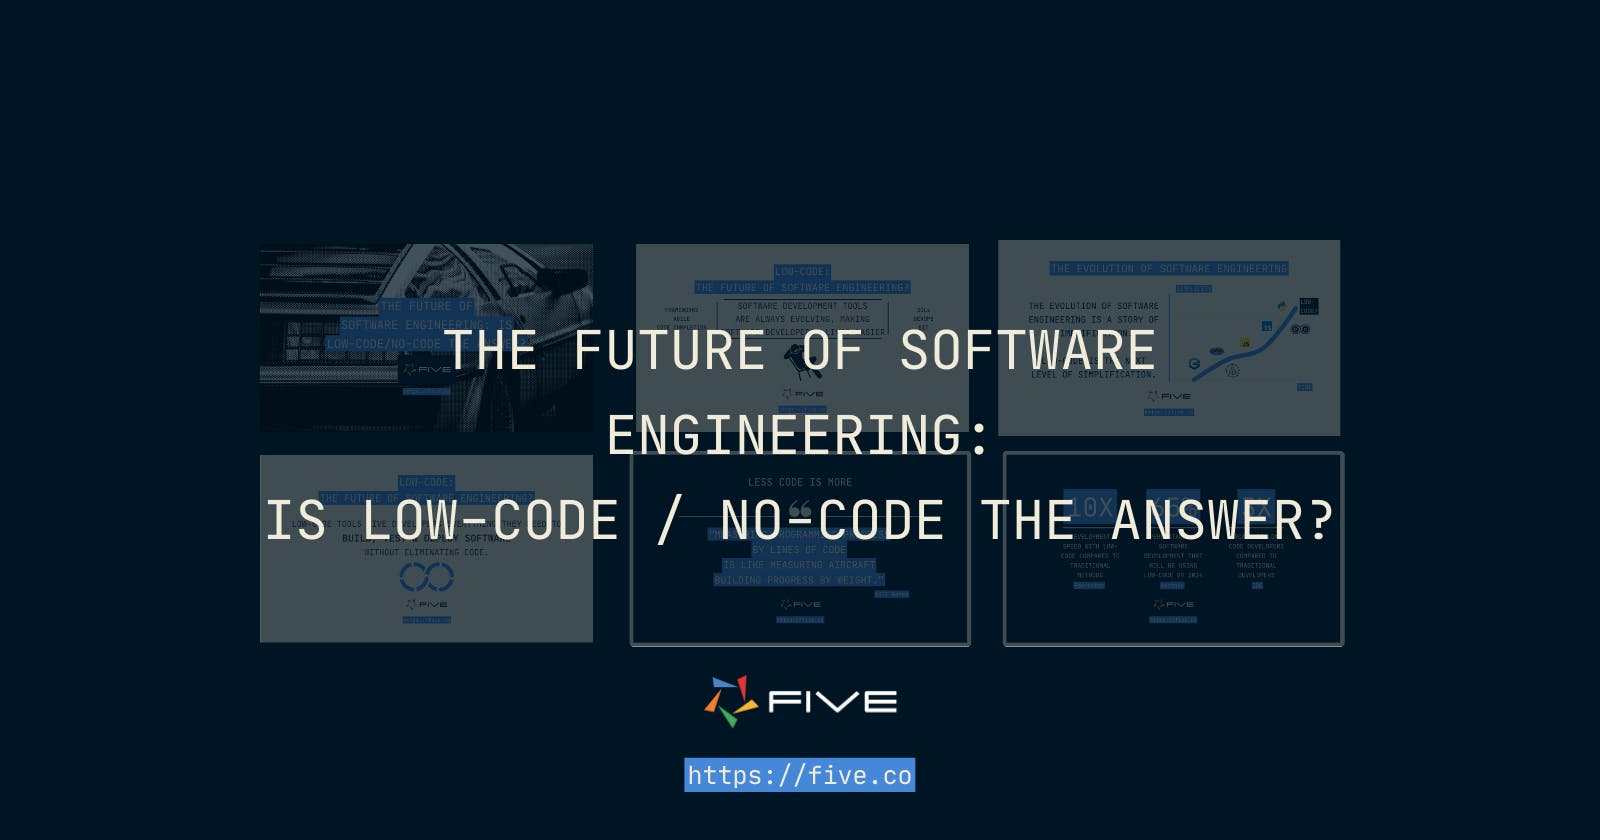 The Future Of Software Engineering: Is Low-Code The Answer? [Infographic]